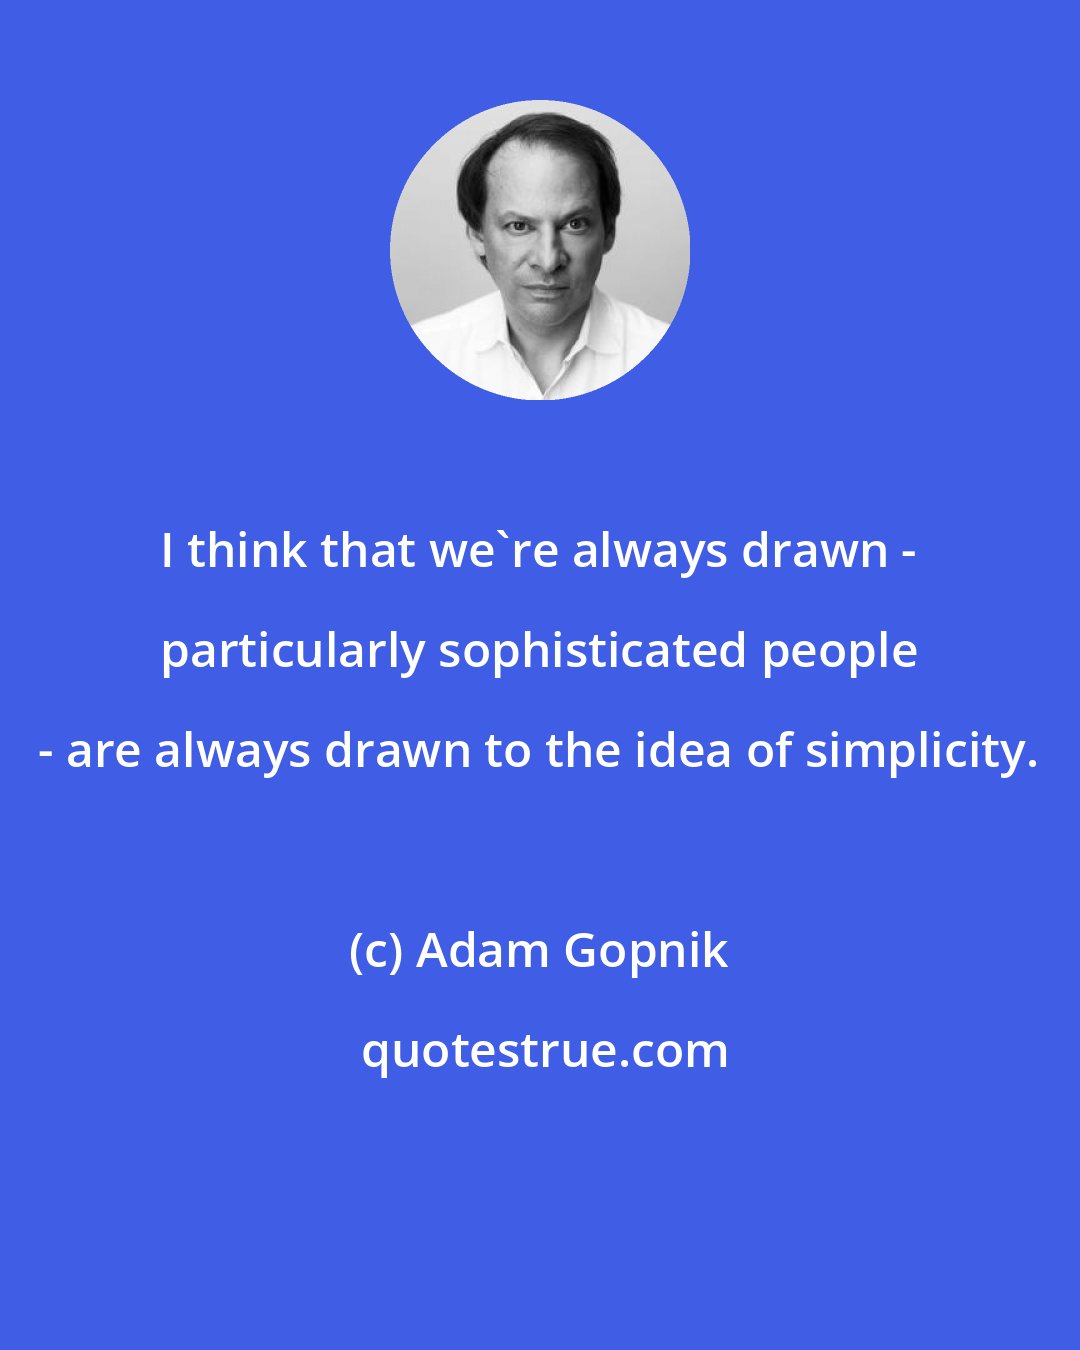 Adam Gopnik: I think that we're always drawn - particularly sophisticated people - are always drawn to the idea of simplicity.